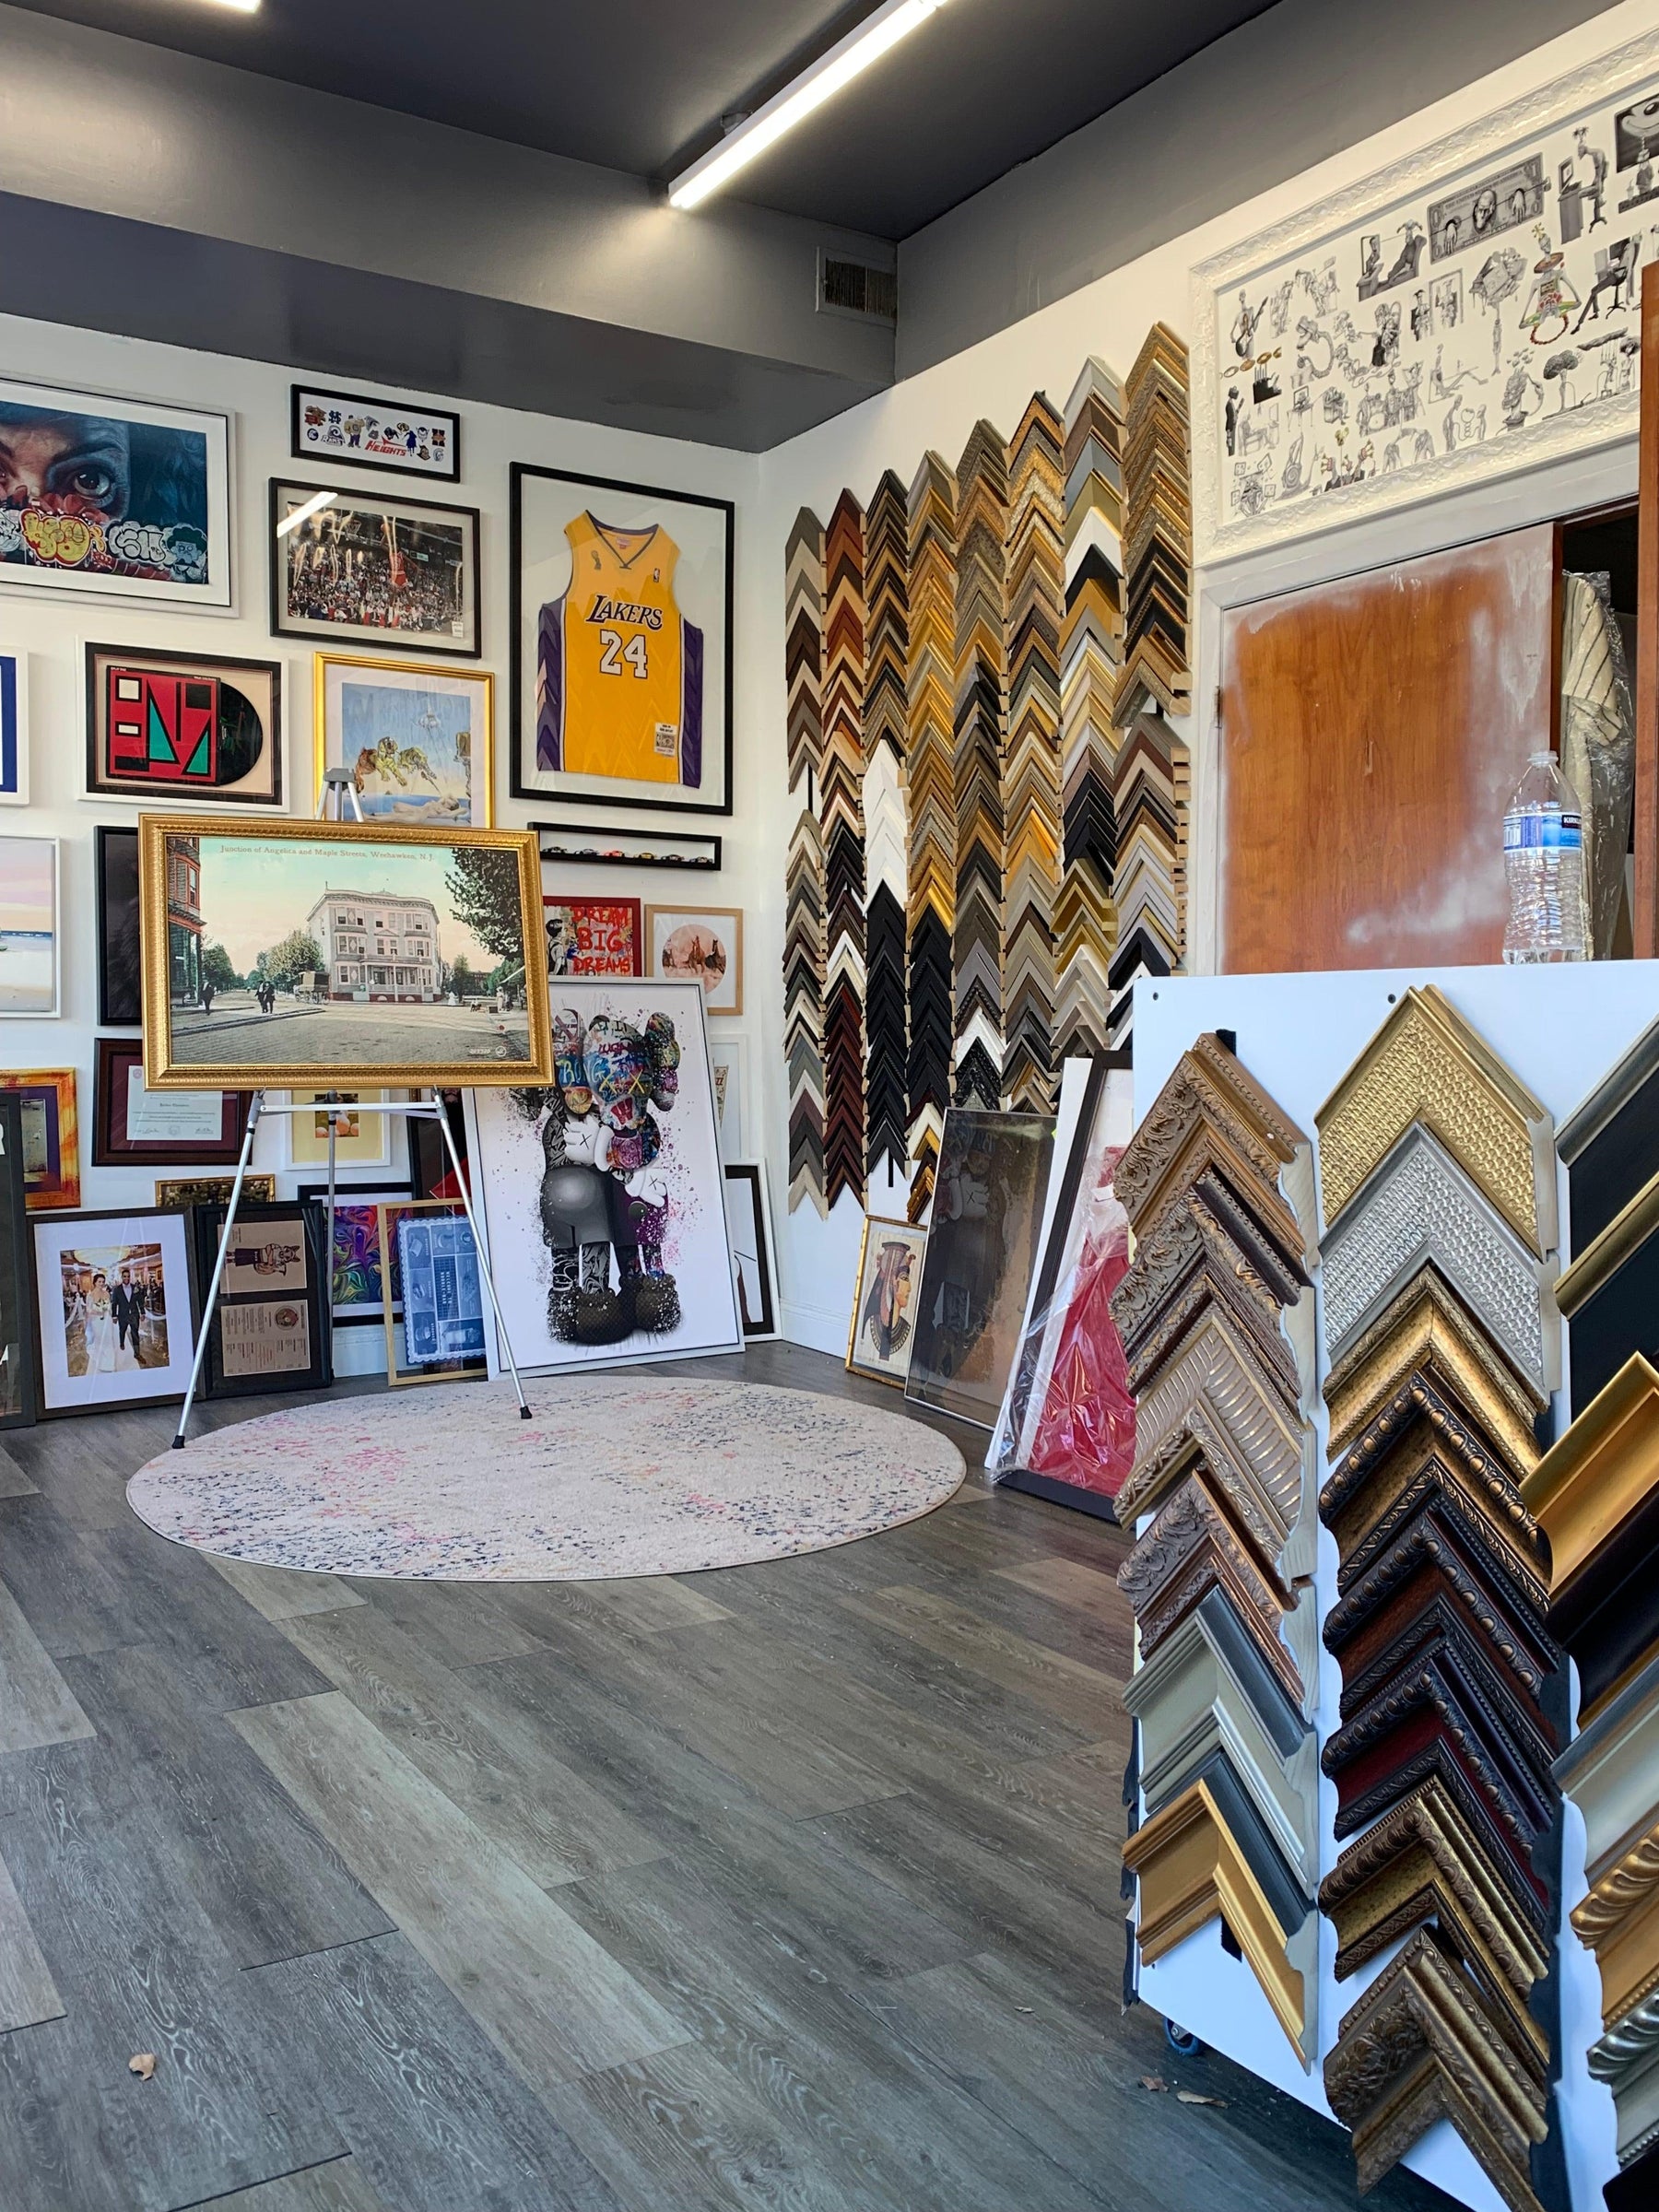 Preserving Your Treasures: How to Store Framed Pictures and Protect Your Artwork - Modern Memory Design Picture frames - NJ Frame shop Custom framing